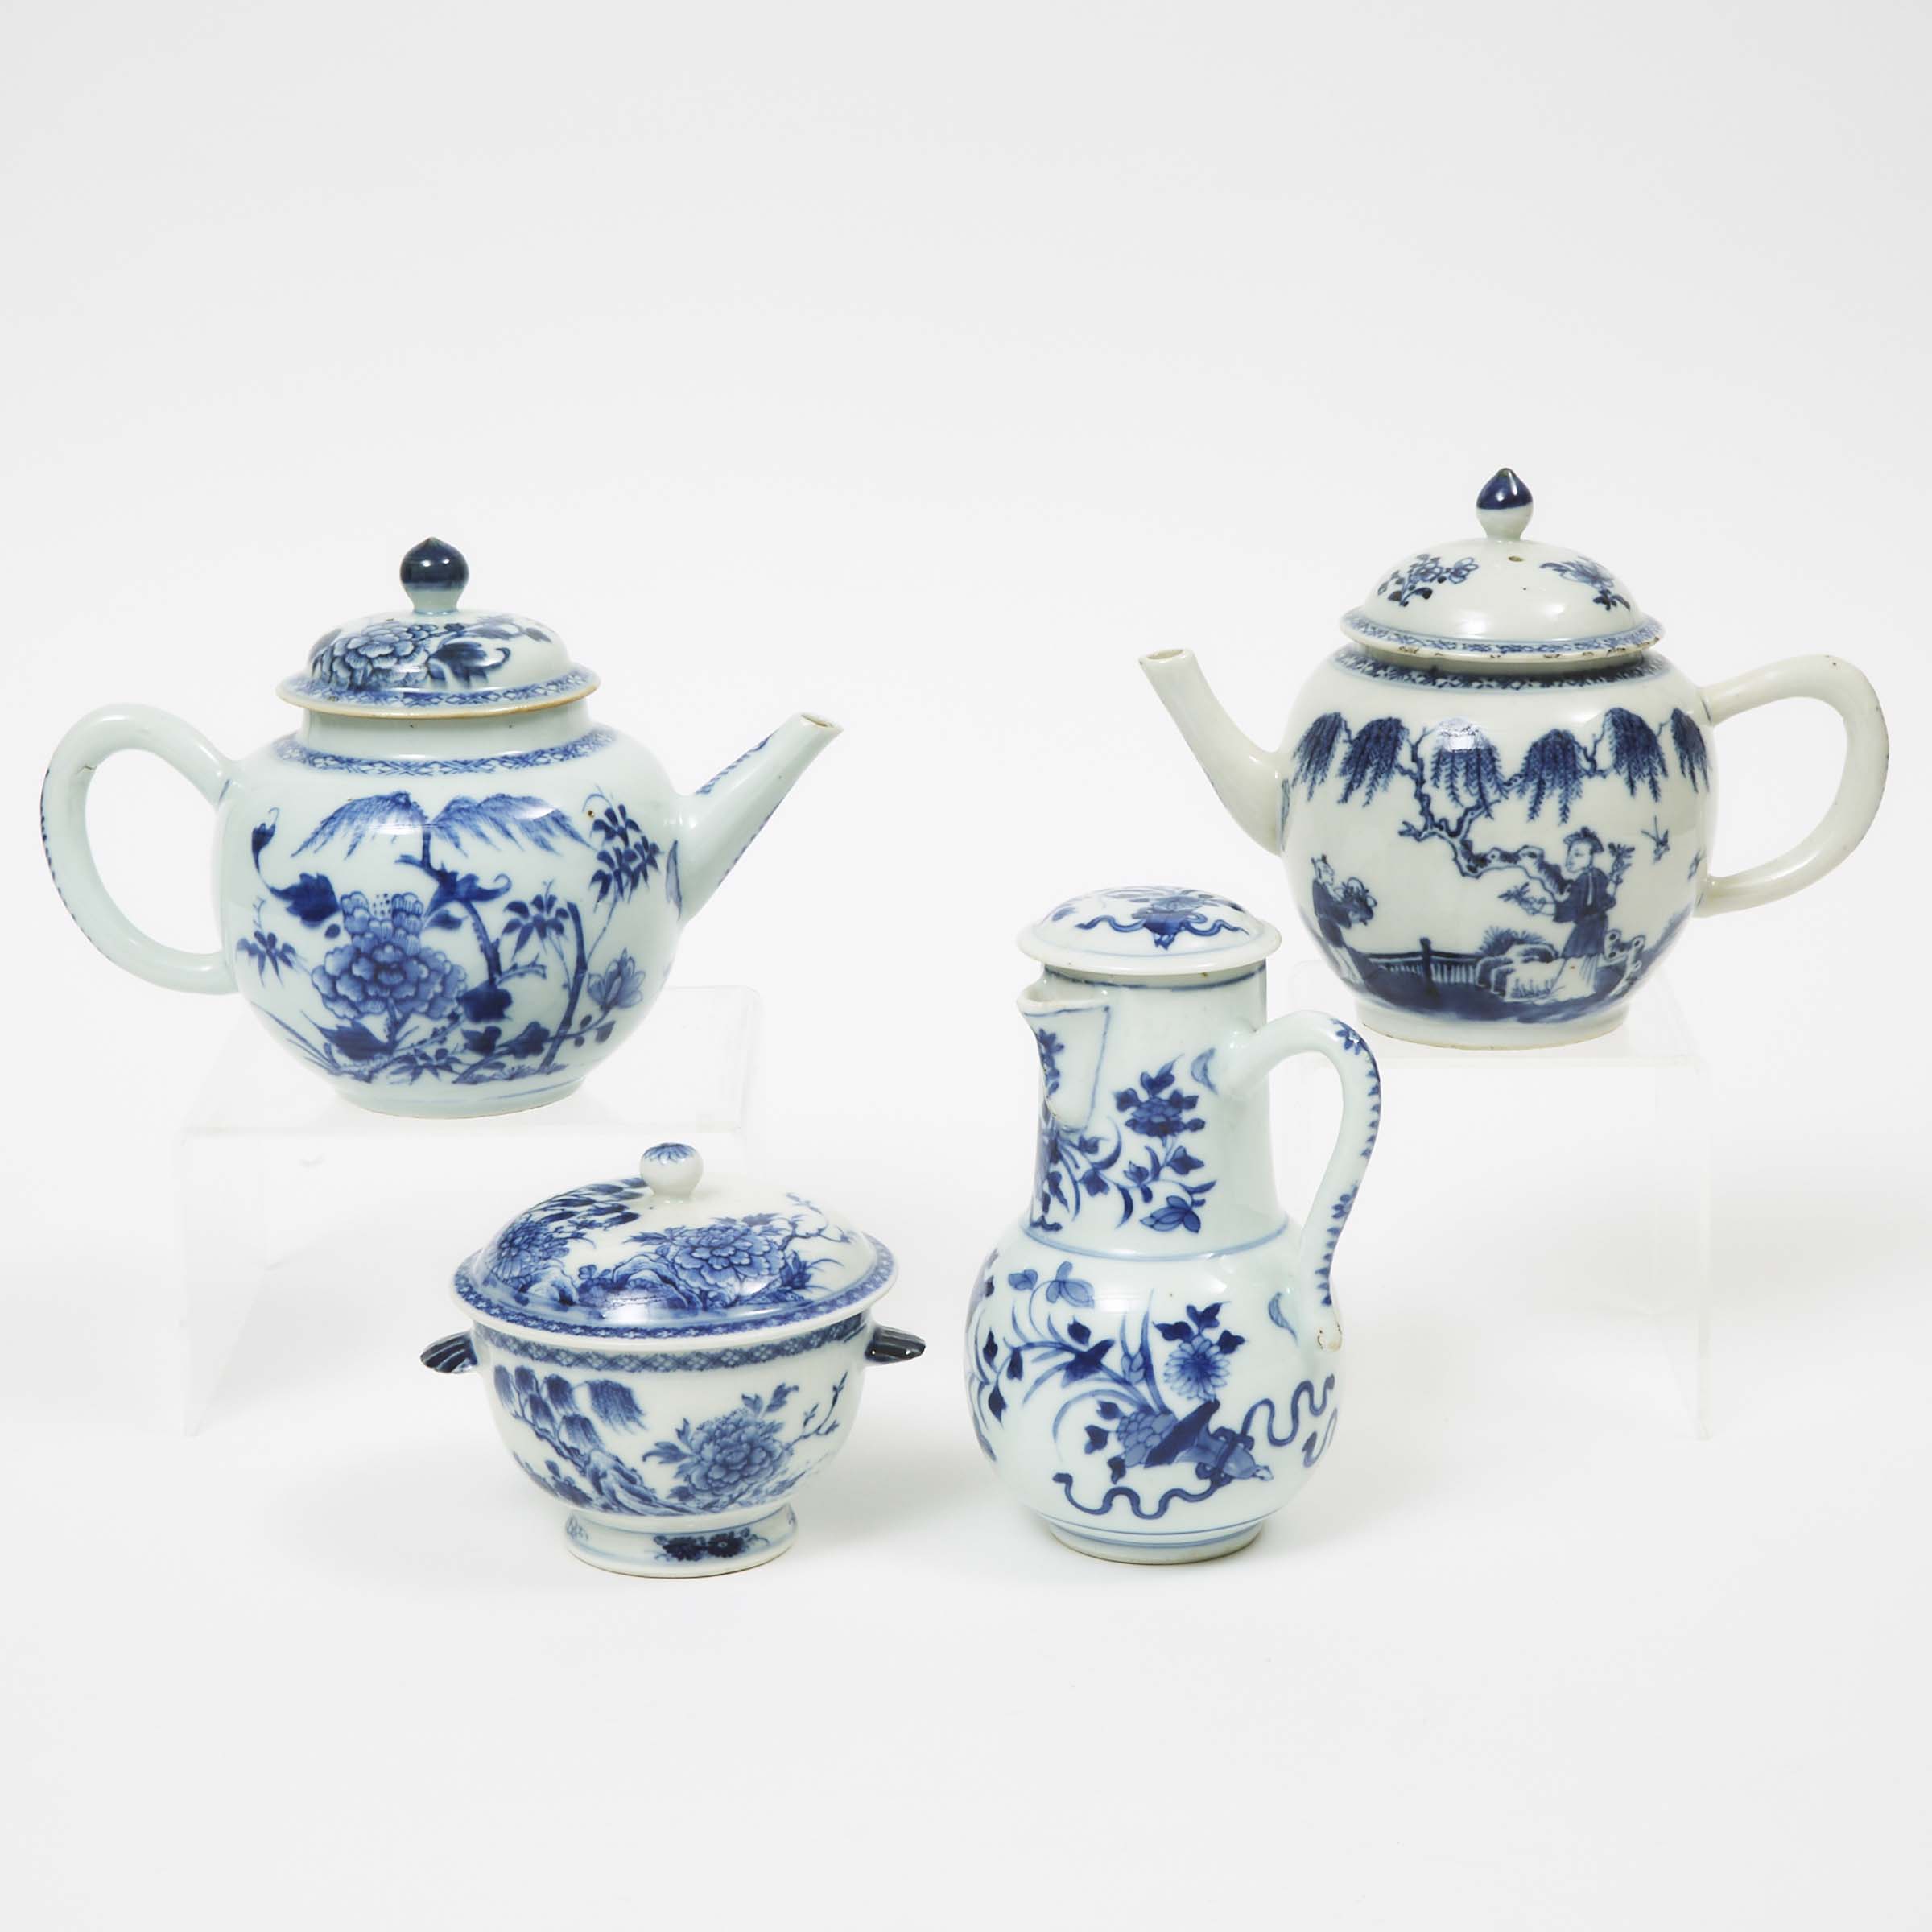 Two Chinese Export Blue and White Teapots, together with a Lidded Creamer and Sugar Bowl, 18th/19th Century